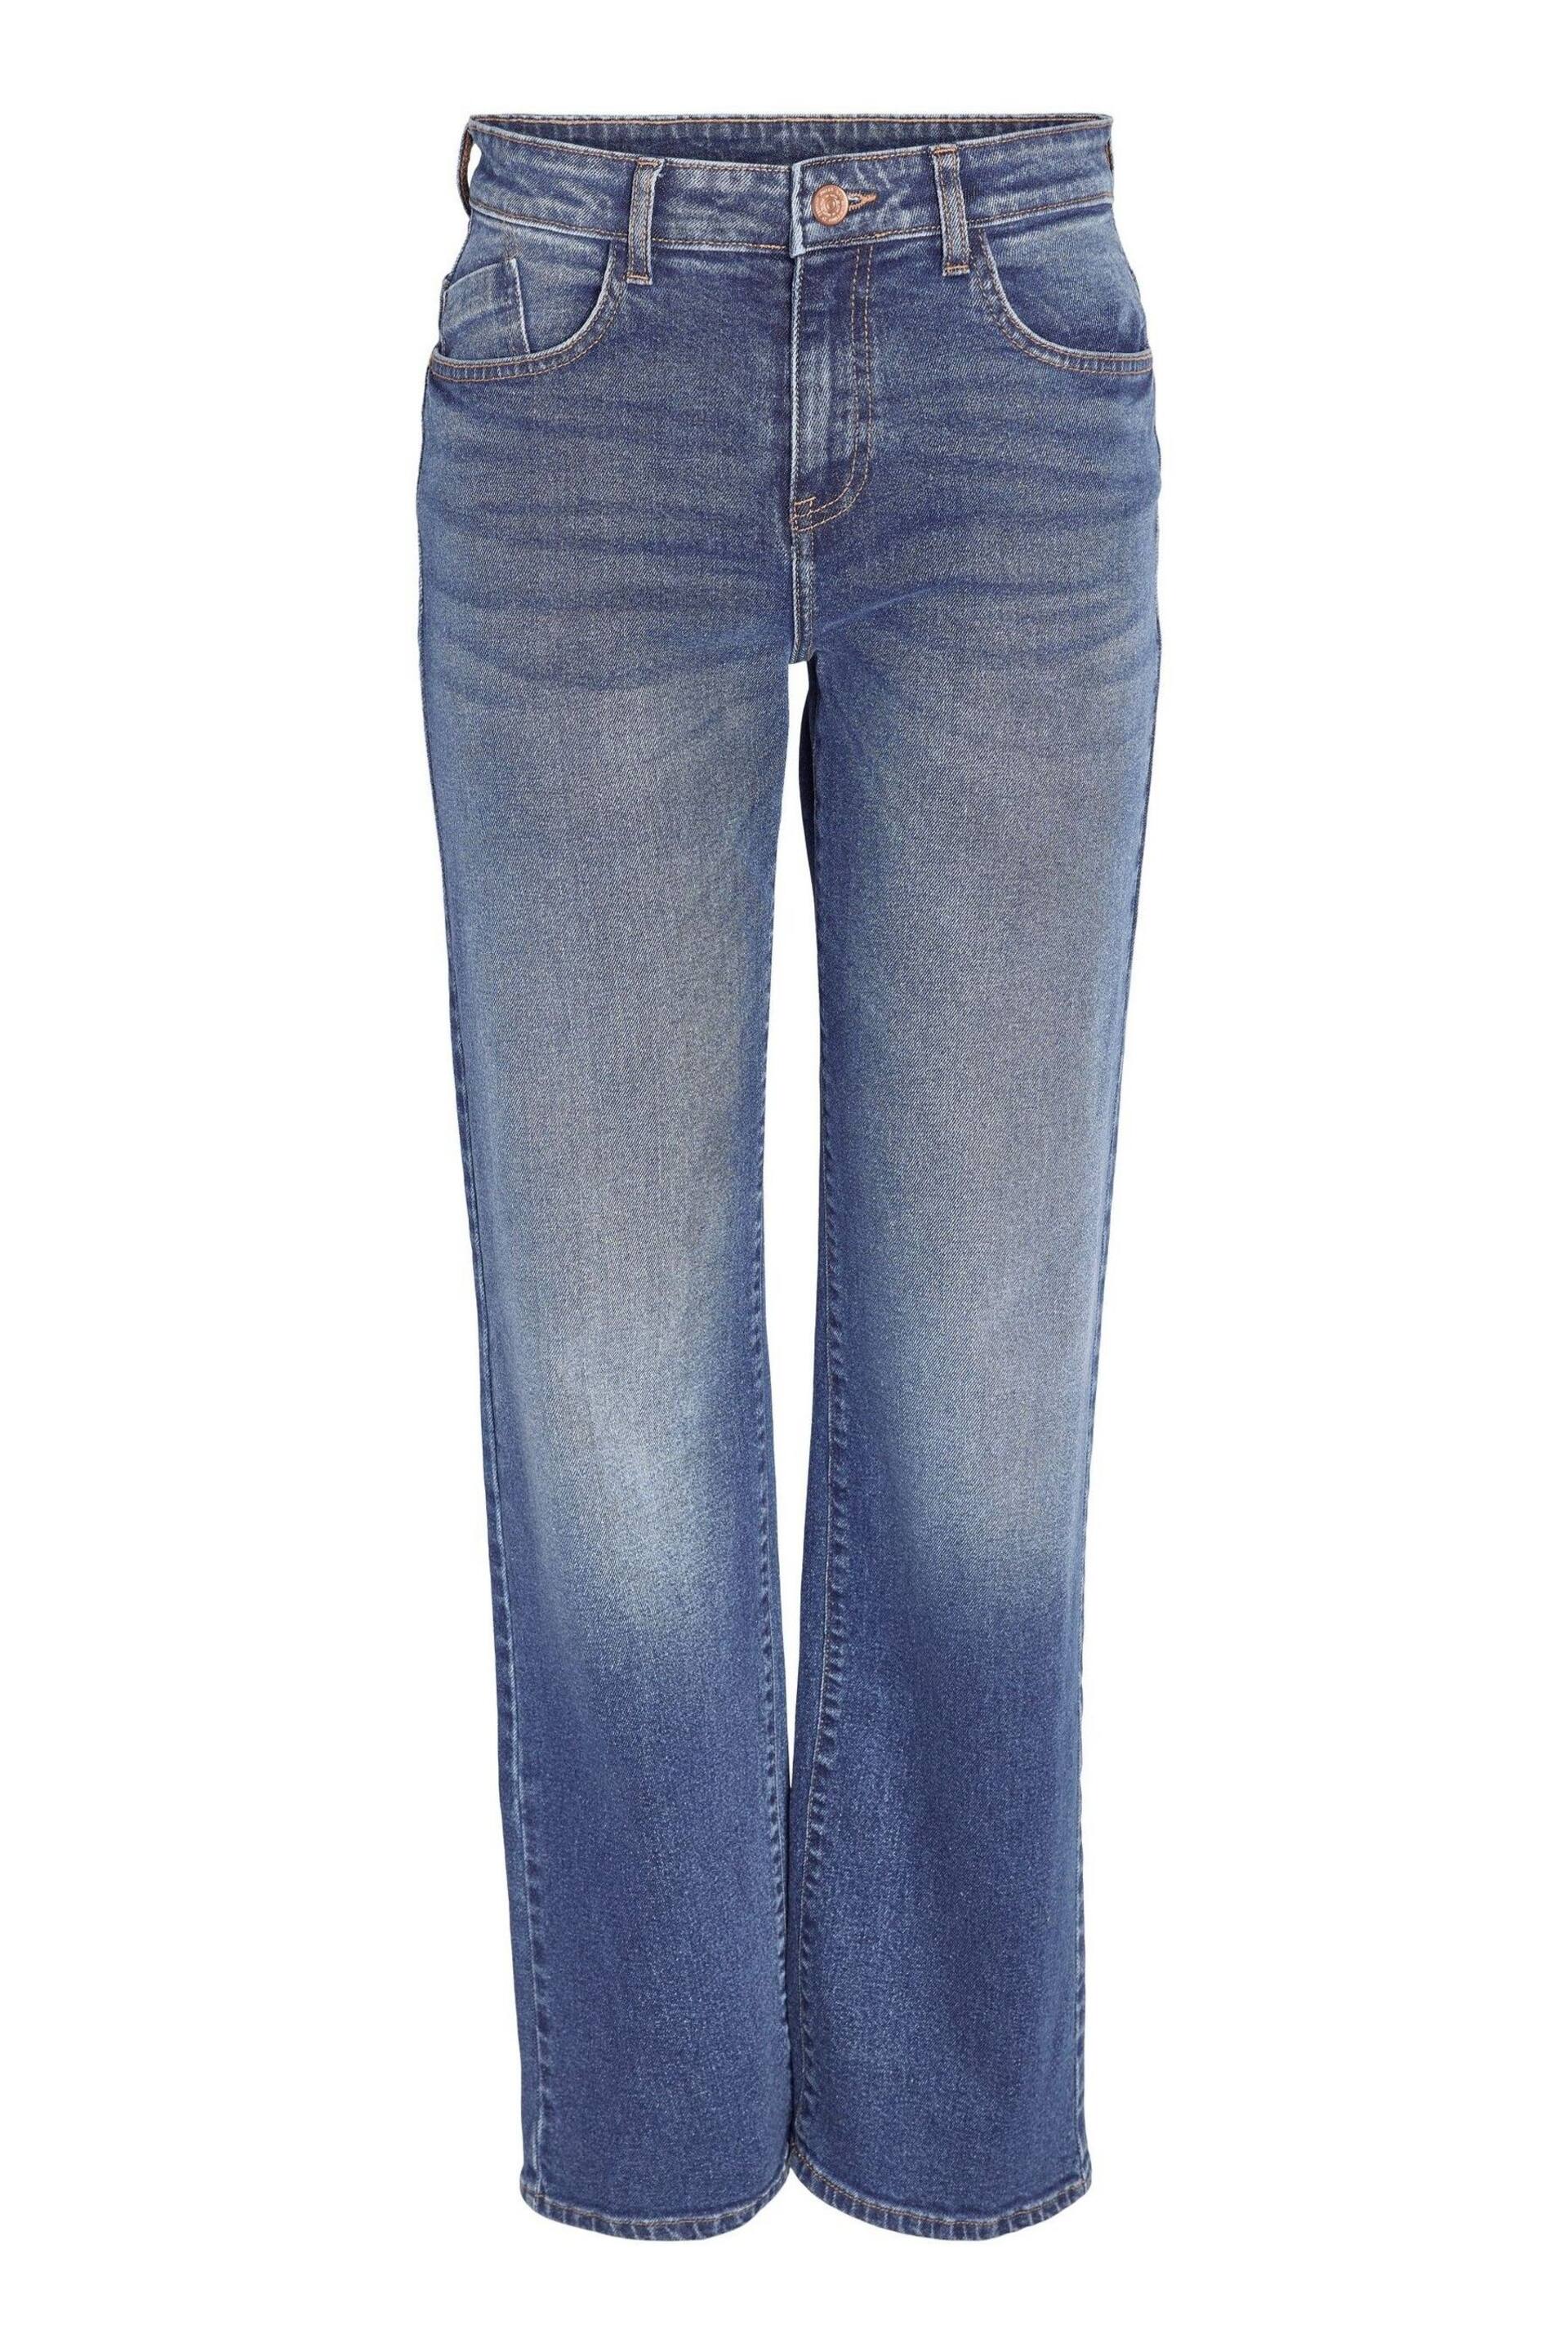 NOISY MAY Blue High Waisted Wide Leg Jeans - Image 7 of 8